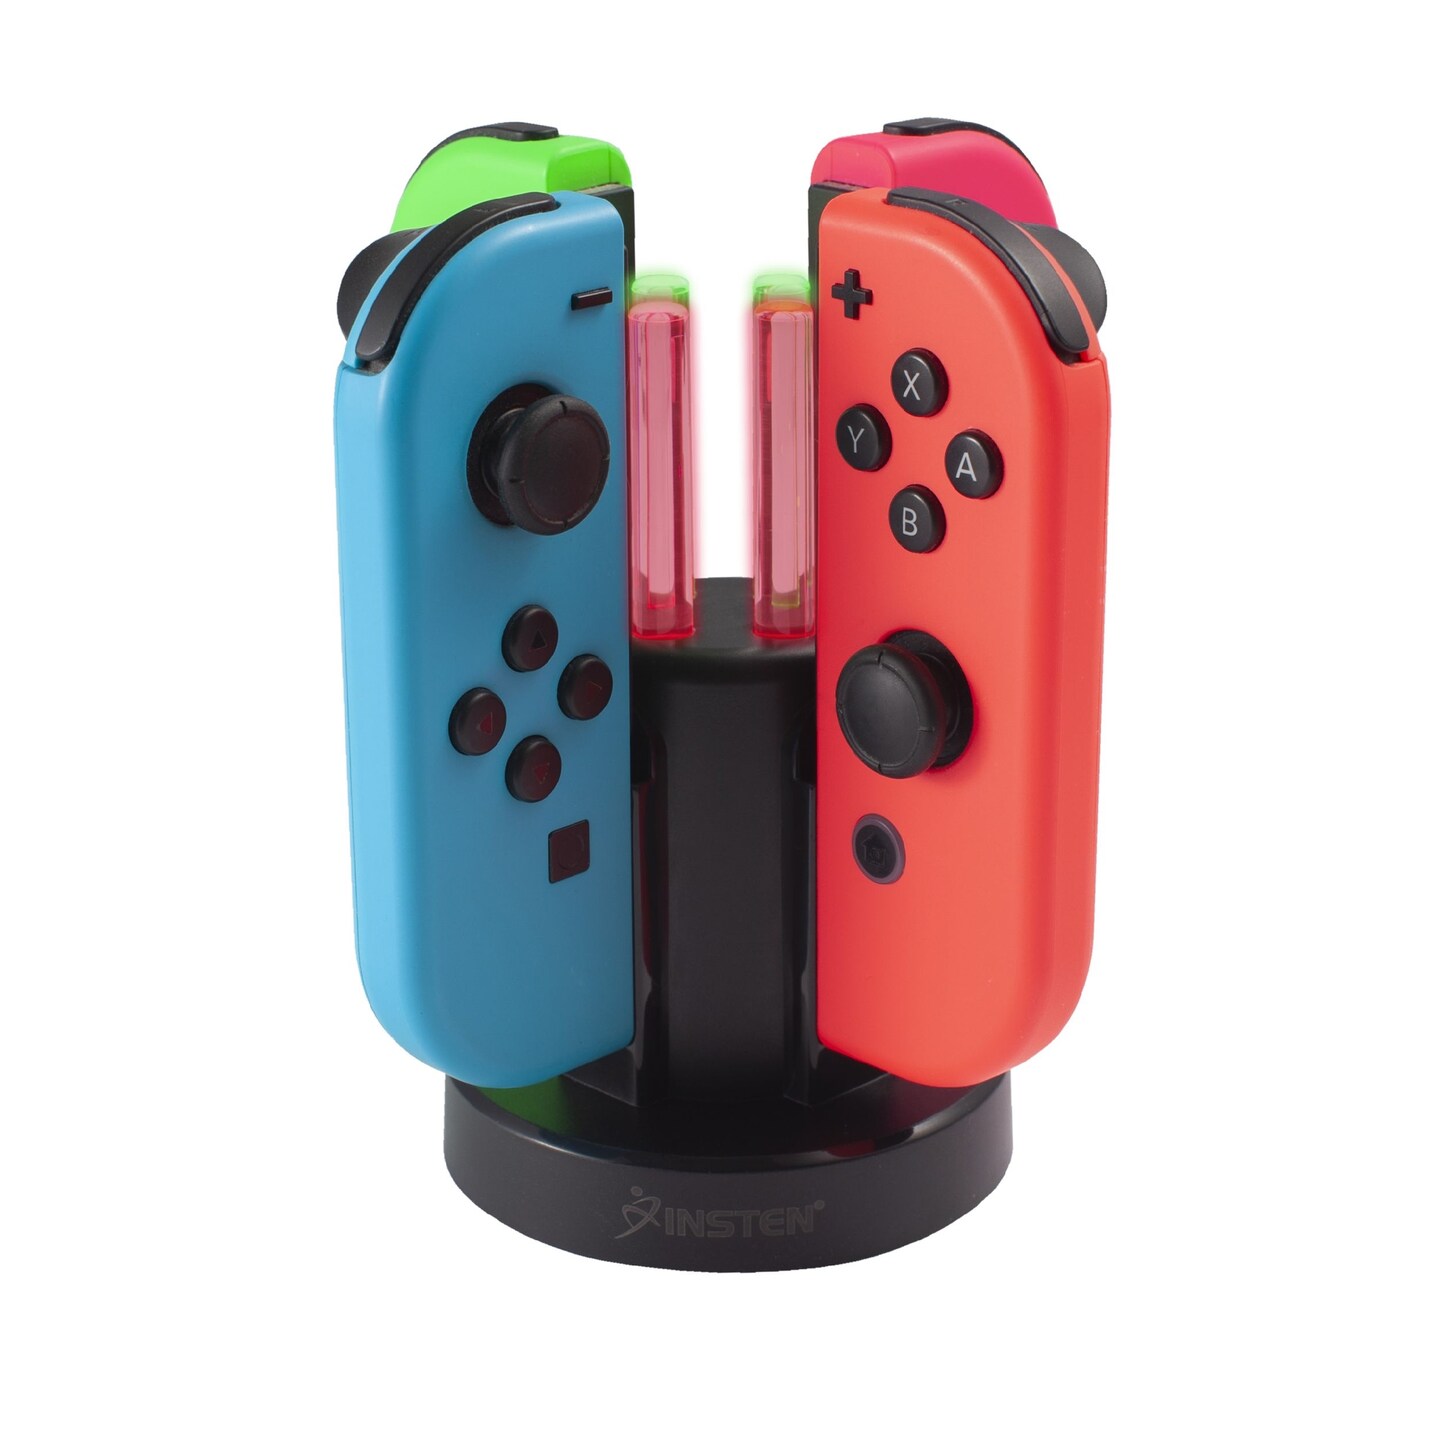 Insten Charging Station Compatible with Nintendo Switch and OLED Model Joy Con Controller, with LED Light Bar Indicator, Compatible with Charger Stand | Michaels